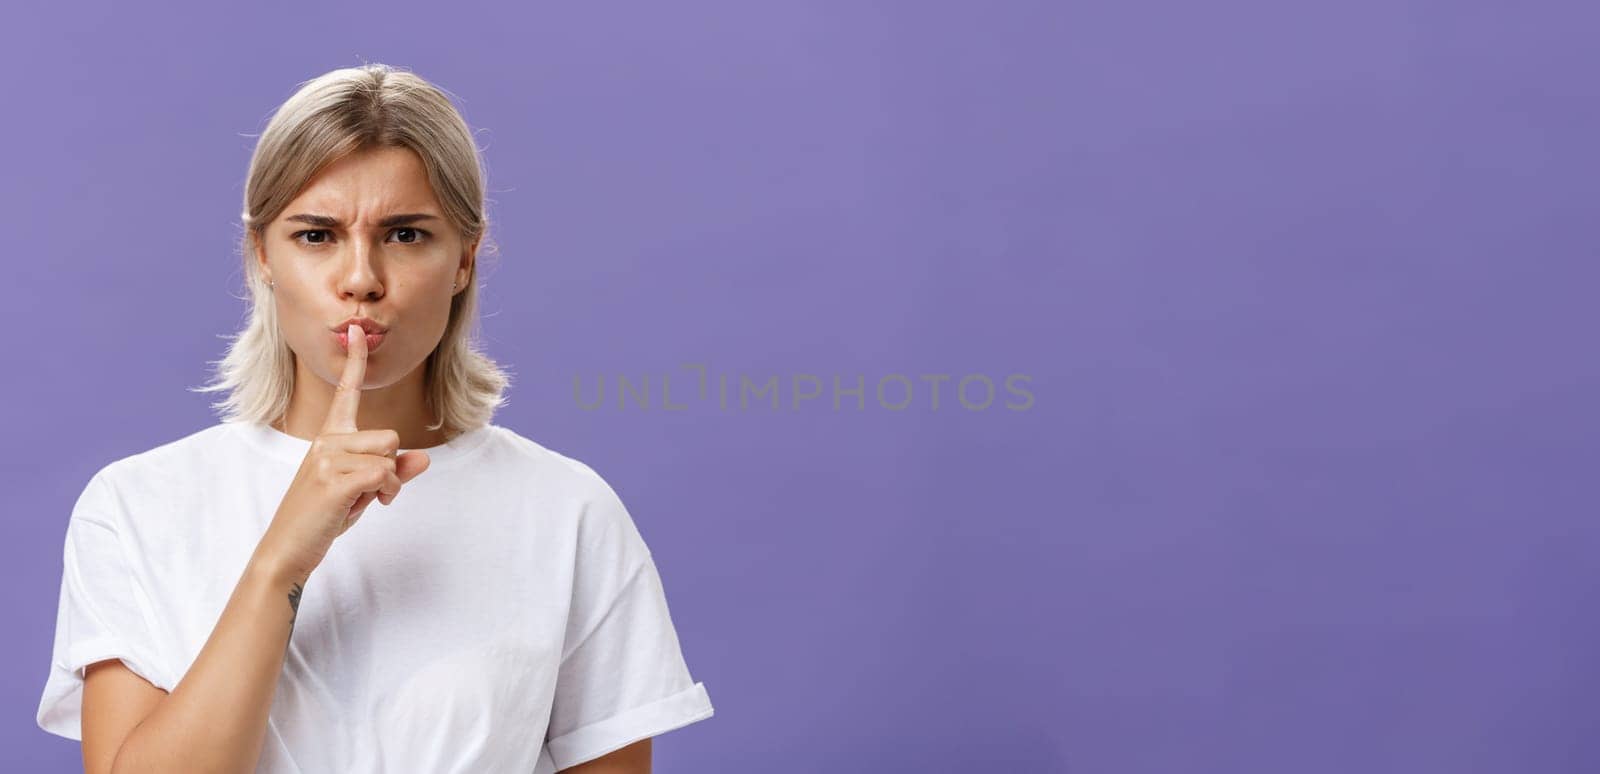 Lifestyle. Close-up shot of serious strict good-looking caucasian female with blond hair shushing at camera displeased and disappointed frowning holding index finger over folded lips in shush sign.